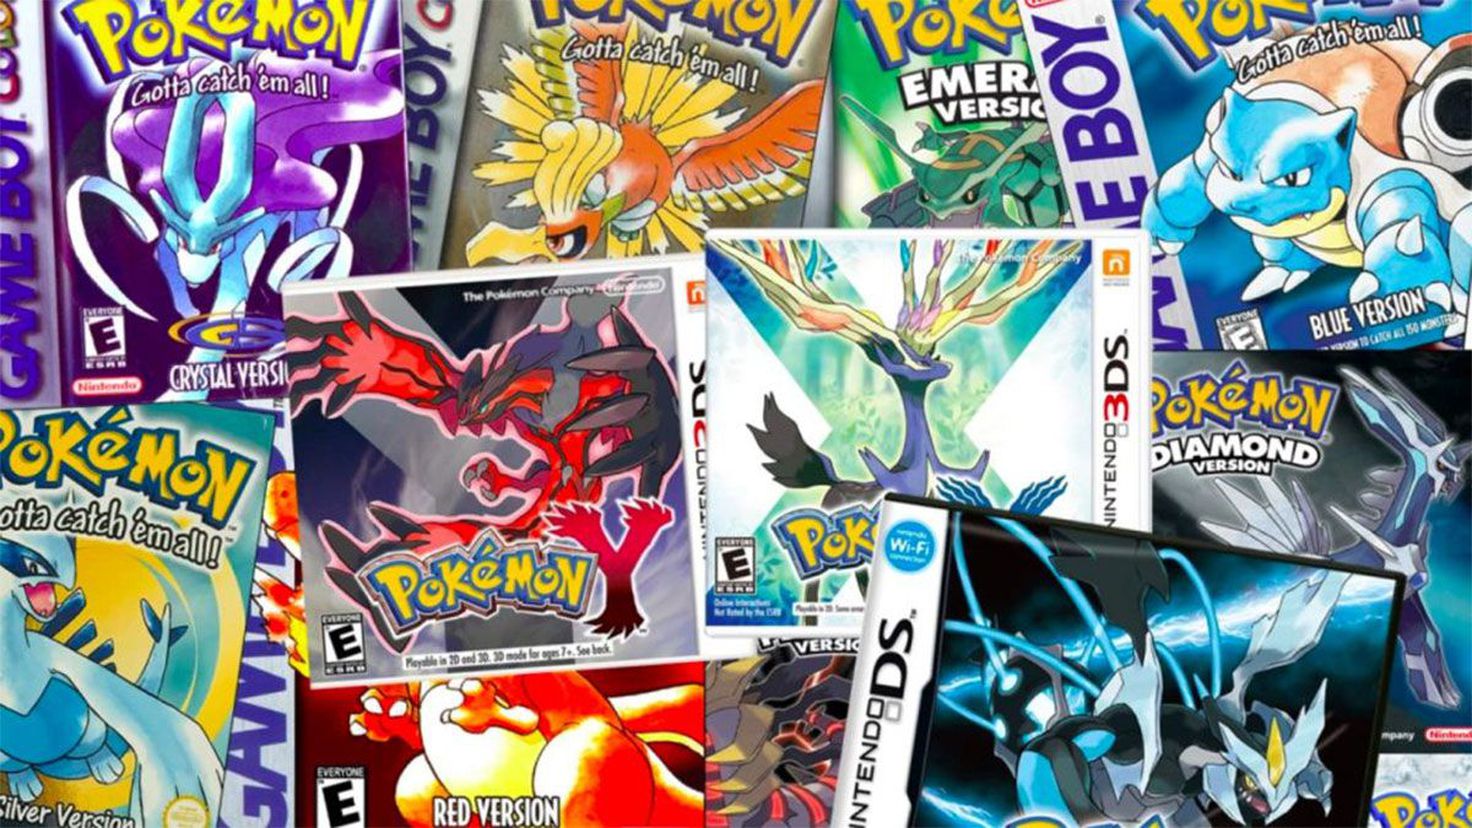 The classic Pokémon games must make the jump to Switch